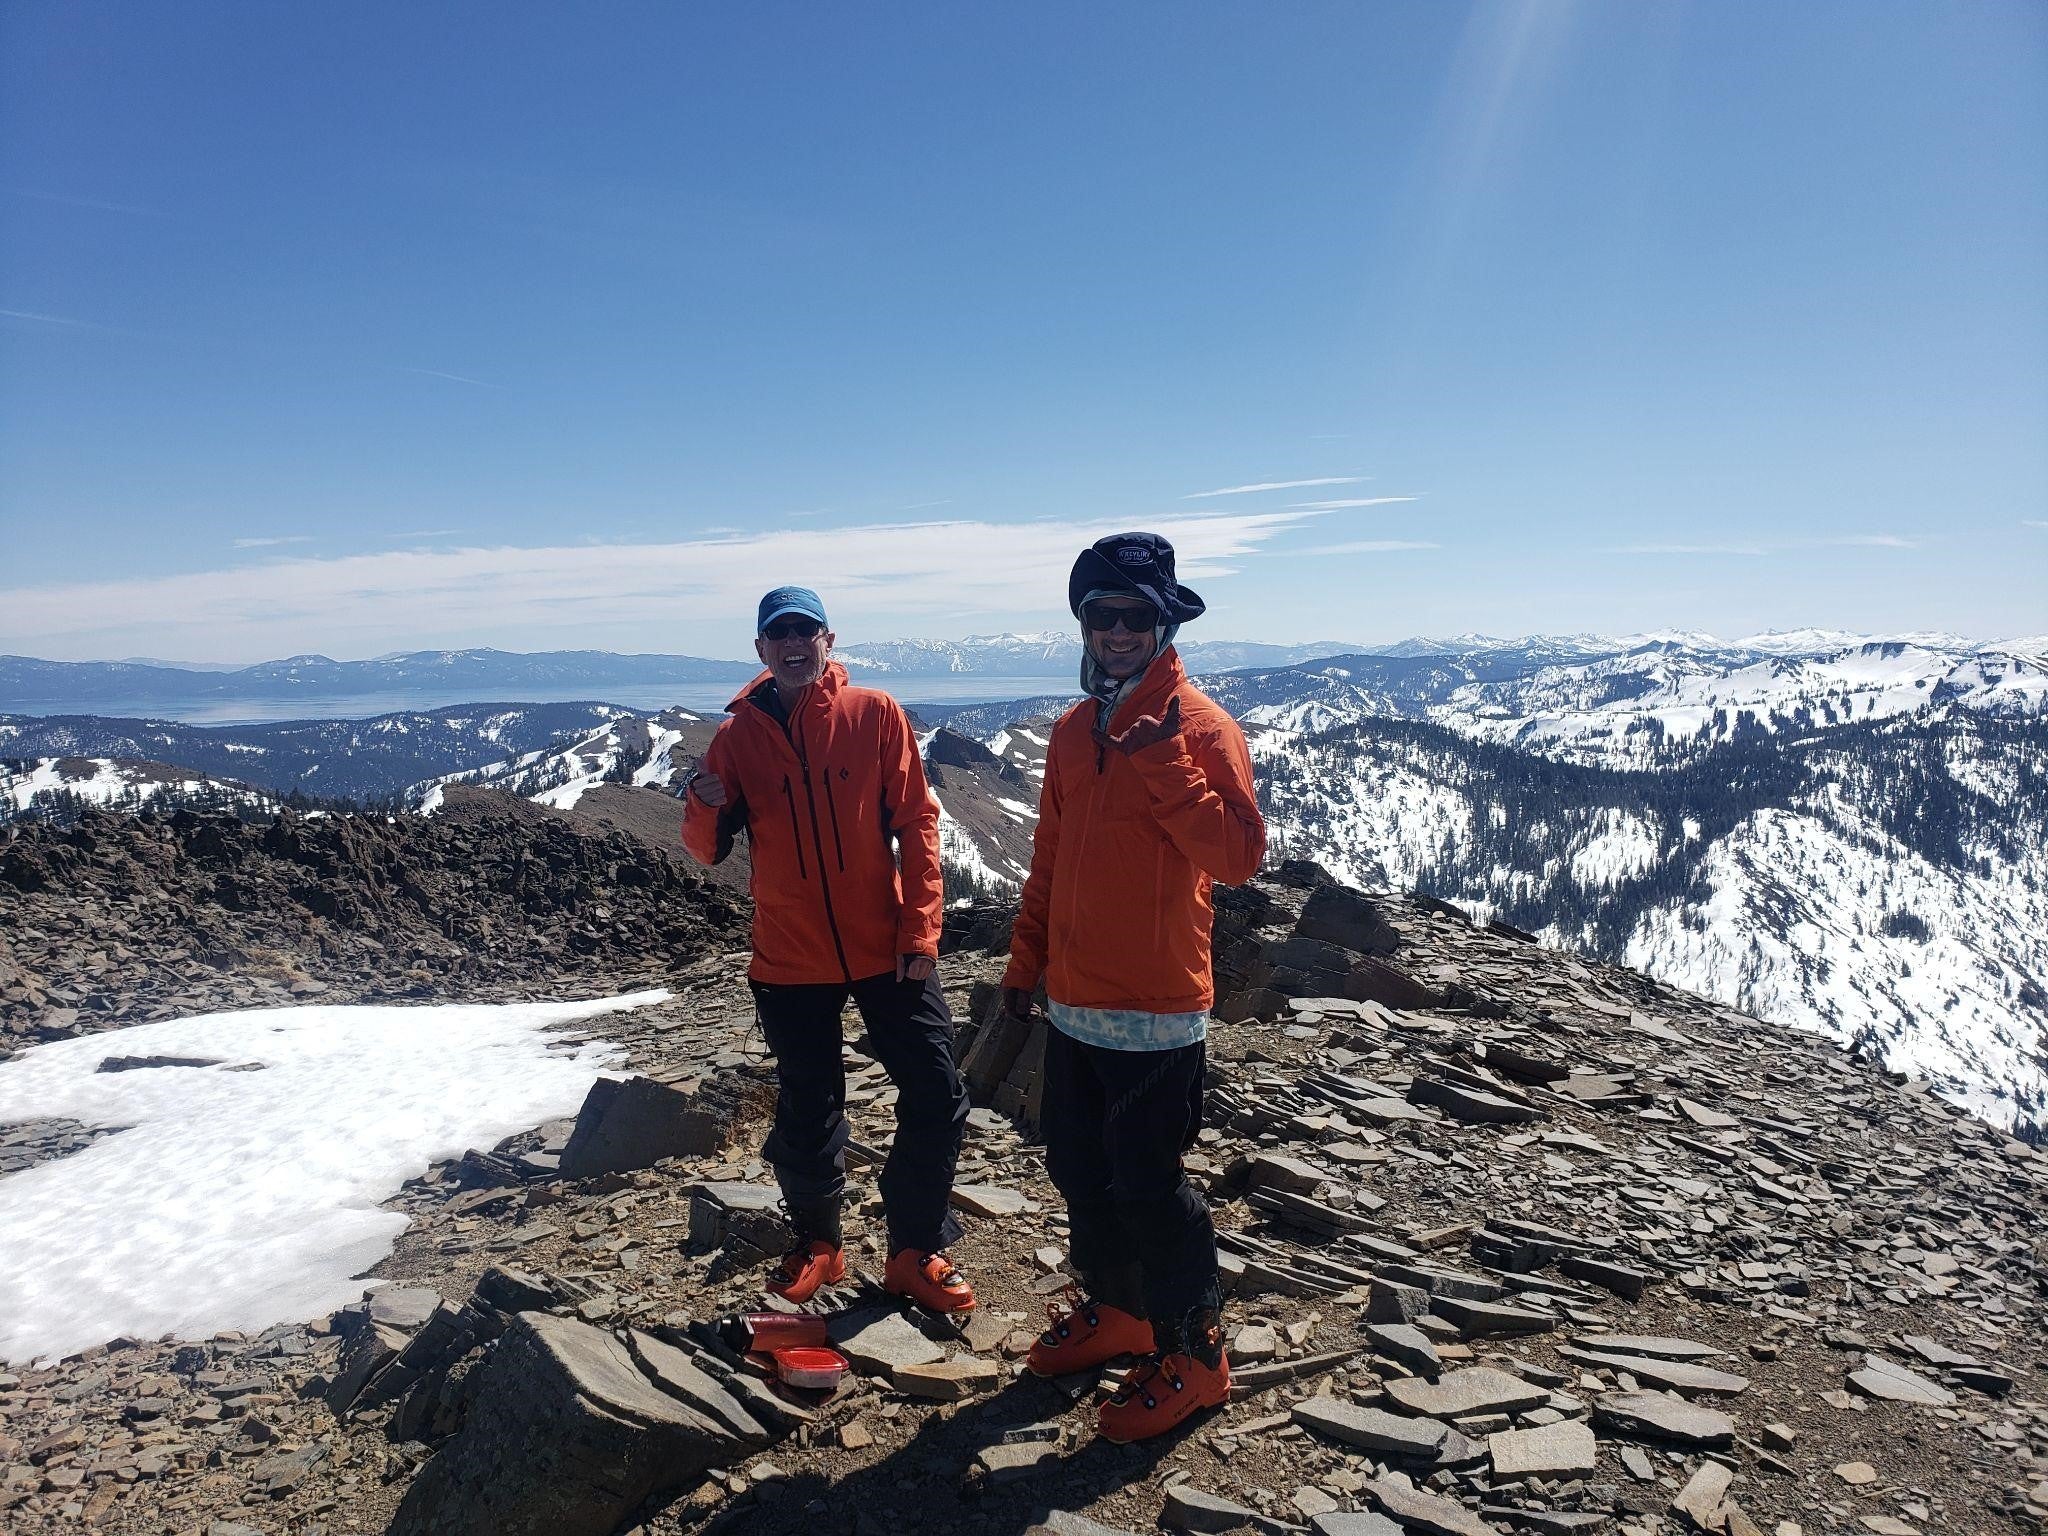 Conditions Report : Sugar Bowl to Palisades Traverse - March 25, 2022